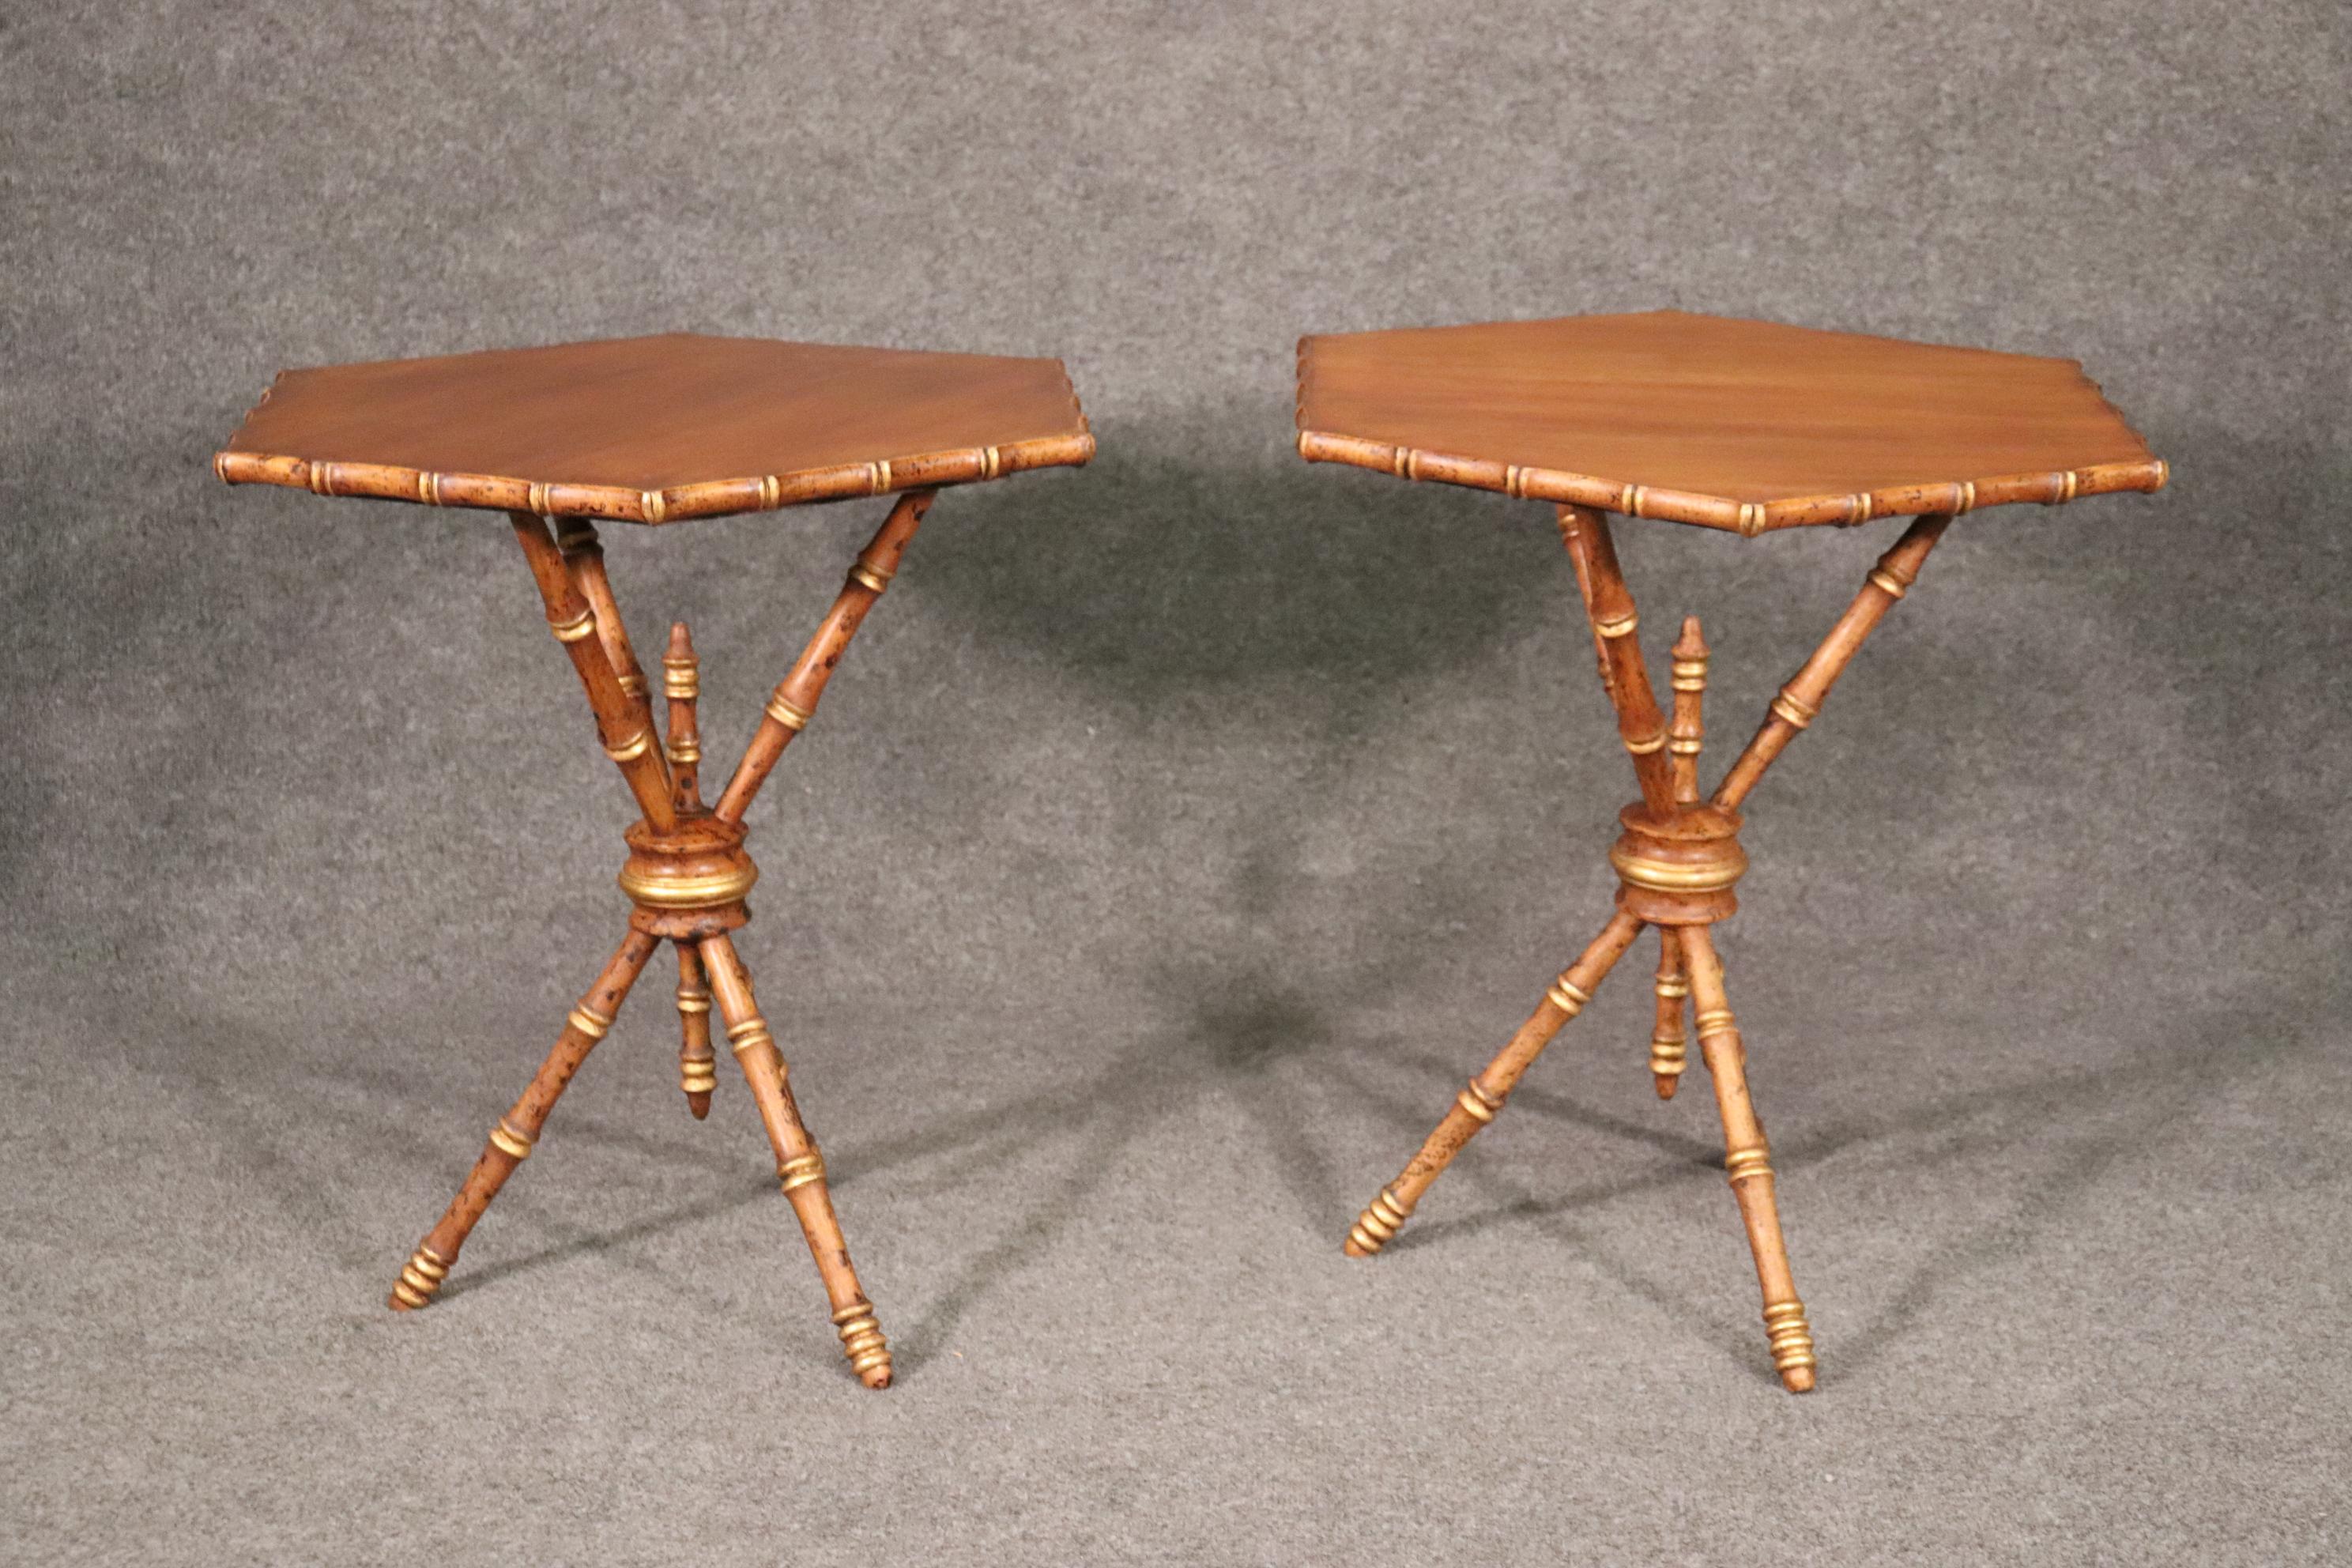 This is a fine pair of French faux bamboo end tables with gold leaf gilded details and beautiful faux distressing to make them look like real bamboo. The tables are in good used vintage condition and measure 25 tall x 21 wide x 21 deep. They date to